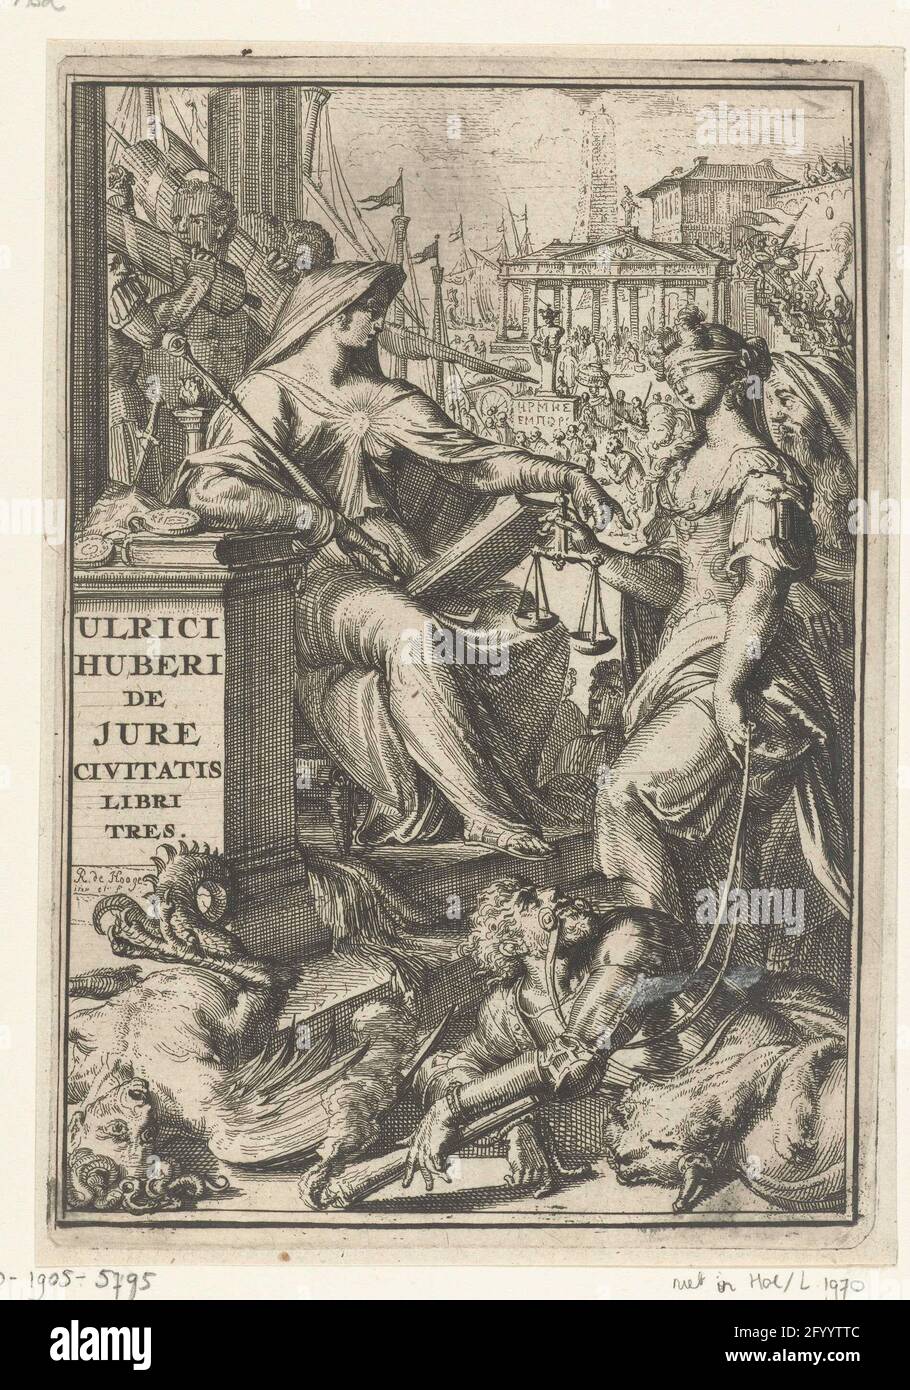 Title print for 'de jure civitatis, libri tres' by Ulricus Huber; Ulrici Huberi de Jure Civitatis Libri Tres. A woman with a heart on the chest, a scepter in one hand and a book in the other hand (truth) is sitting on a throne. Opposite her is a blindfolded woman with a scales in hand (justice). On the ground some figures symbolize evil matters. Stock Photo